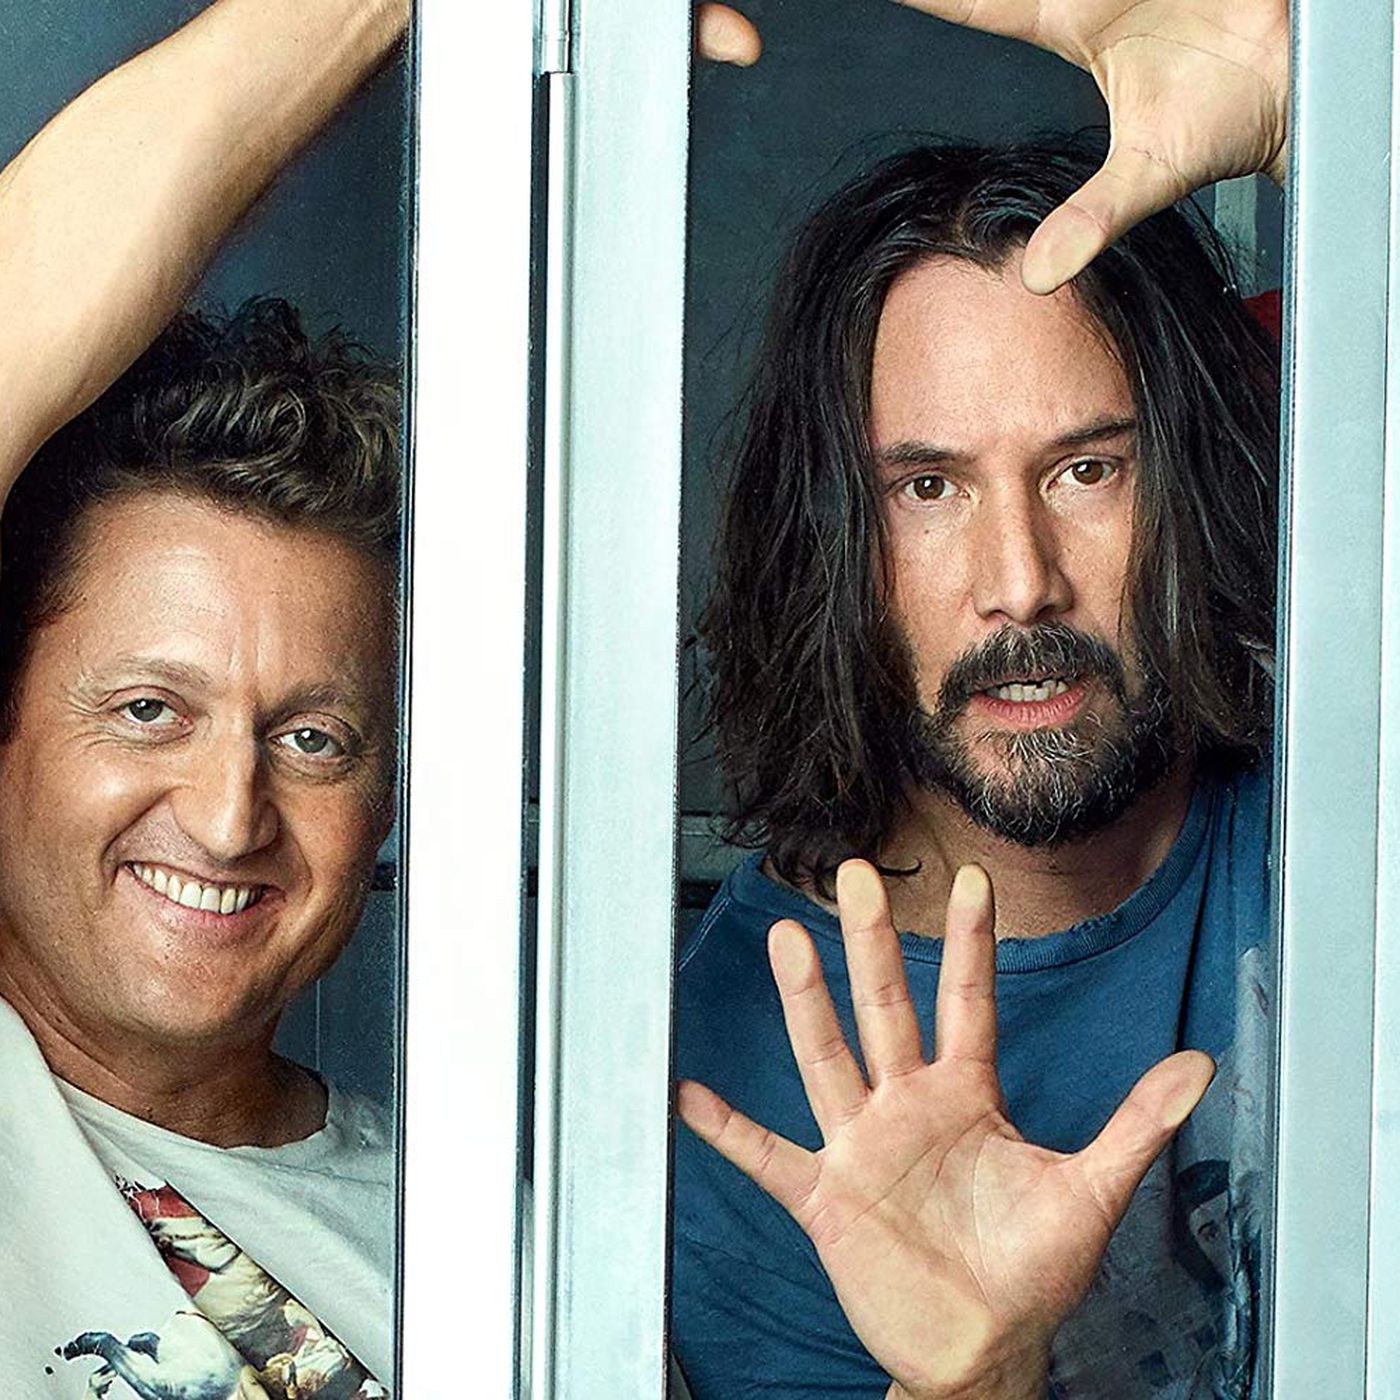 "Bill And Ted 3" Is All Prepared To Save The World With Harmony: Get The Release Date, Plot, Cast, And More!!